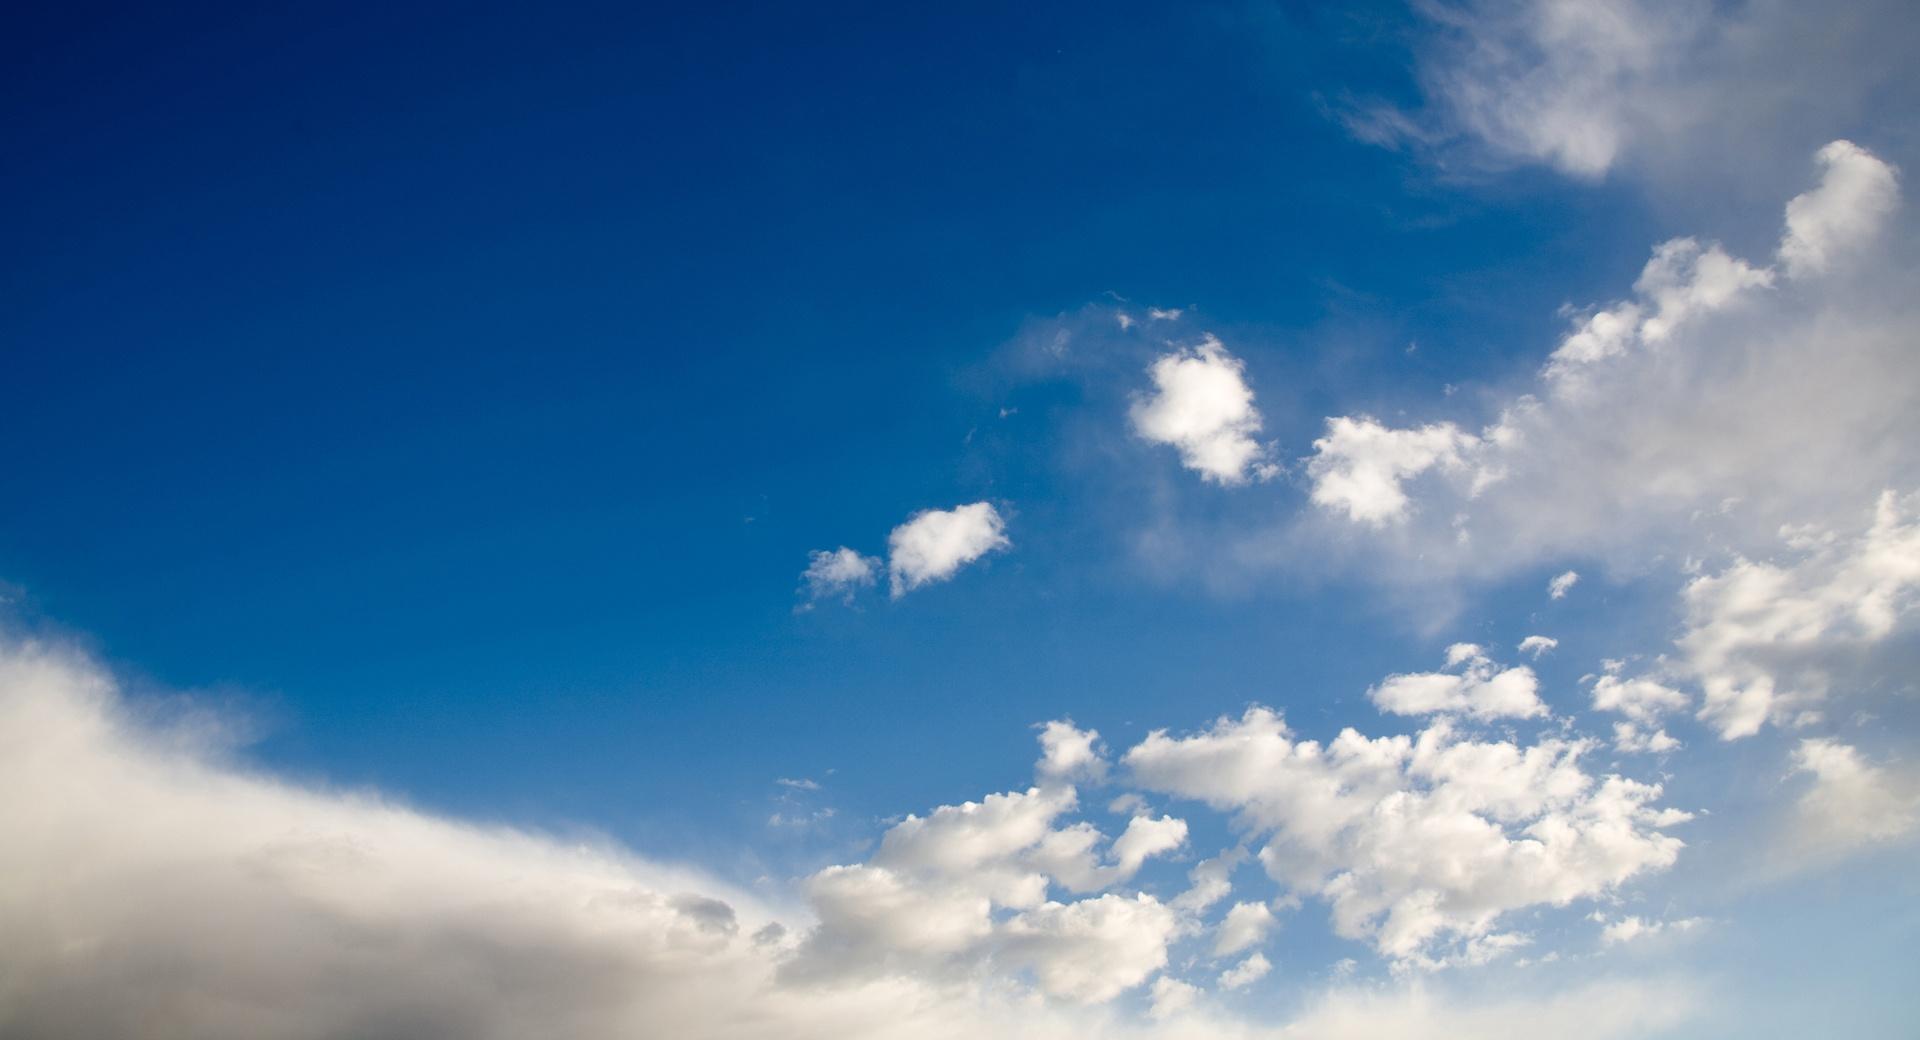 Deep Blue Sky With White Clouds wallpapers HD quality